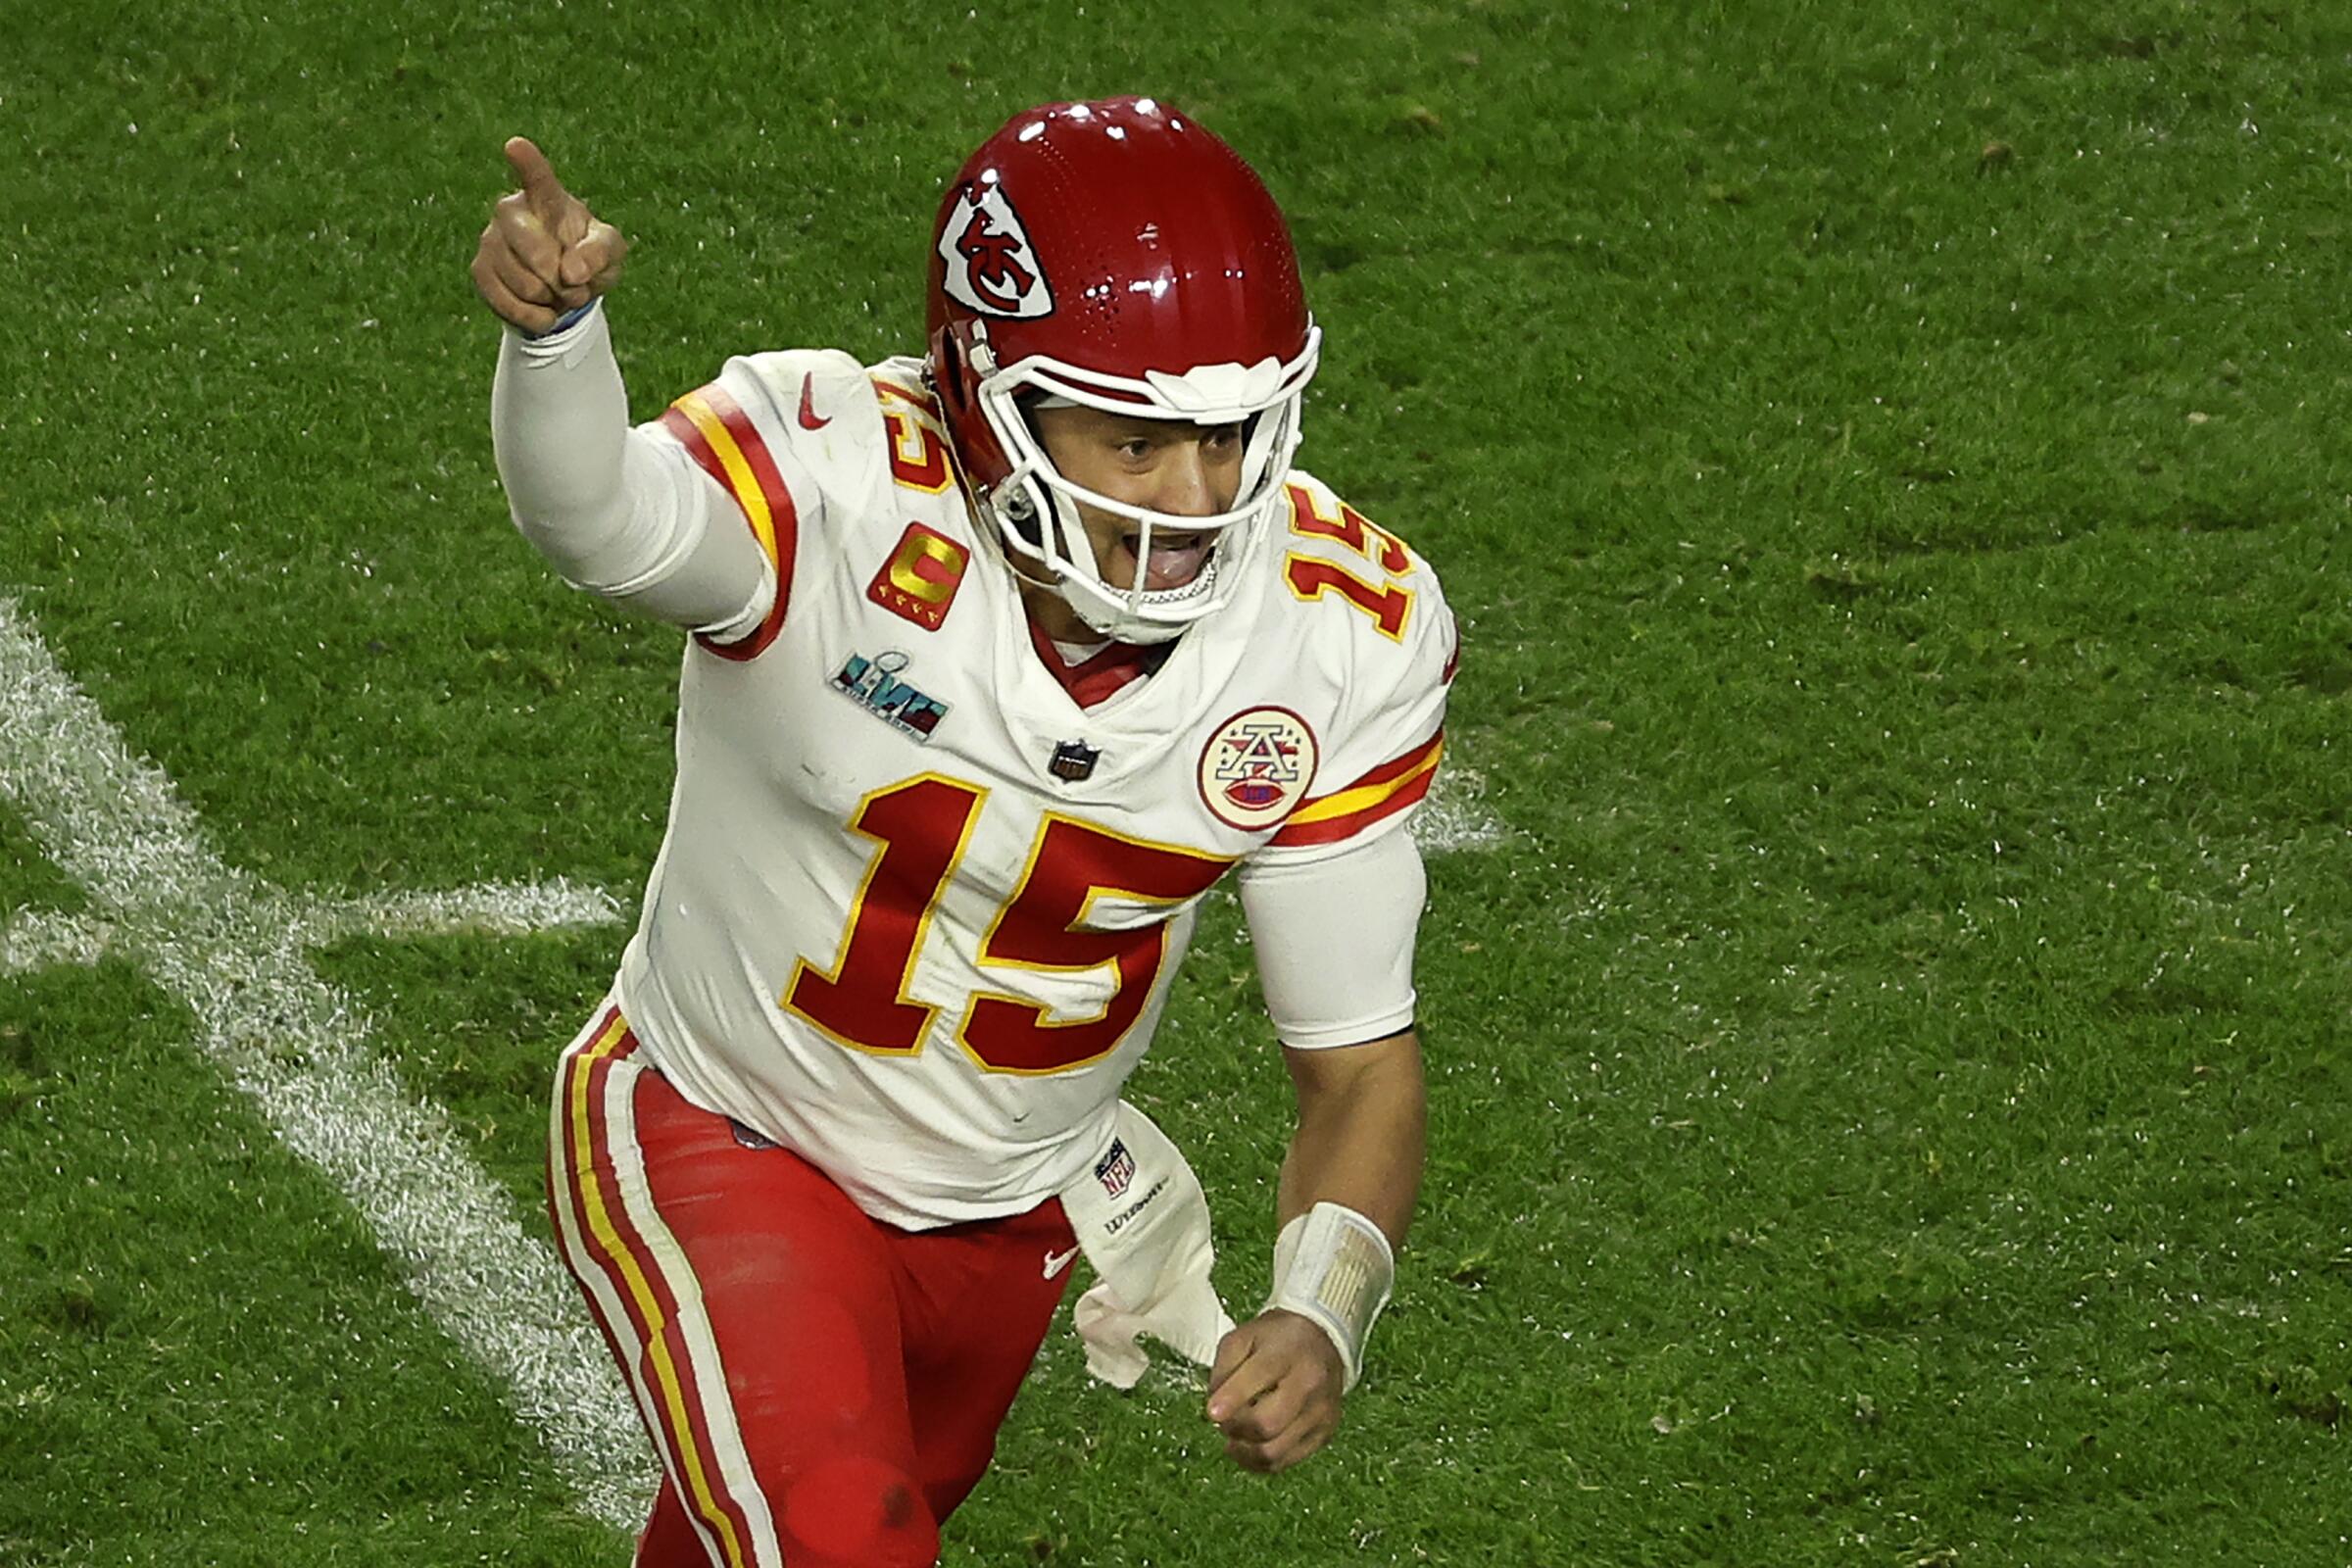 Kansas City Chiefs quarterback Patrick Mahomes raises his right arm to signal No. 1 after throwing a touchdown pass.